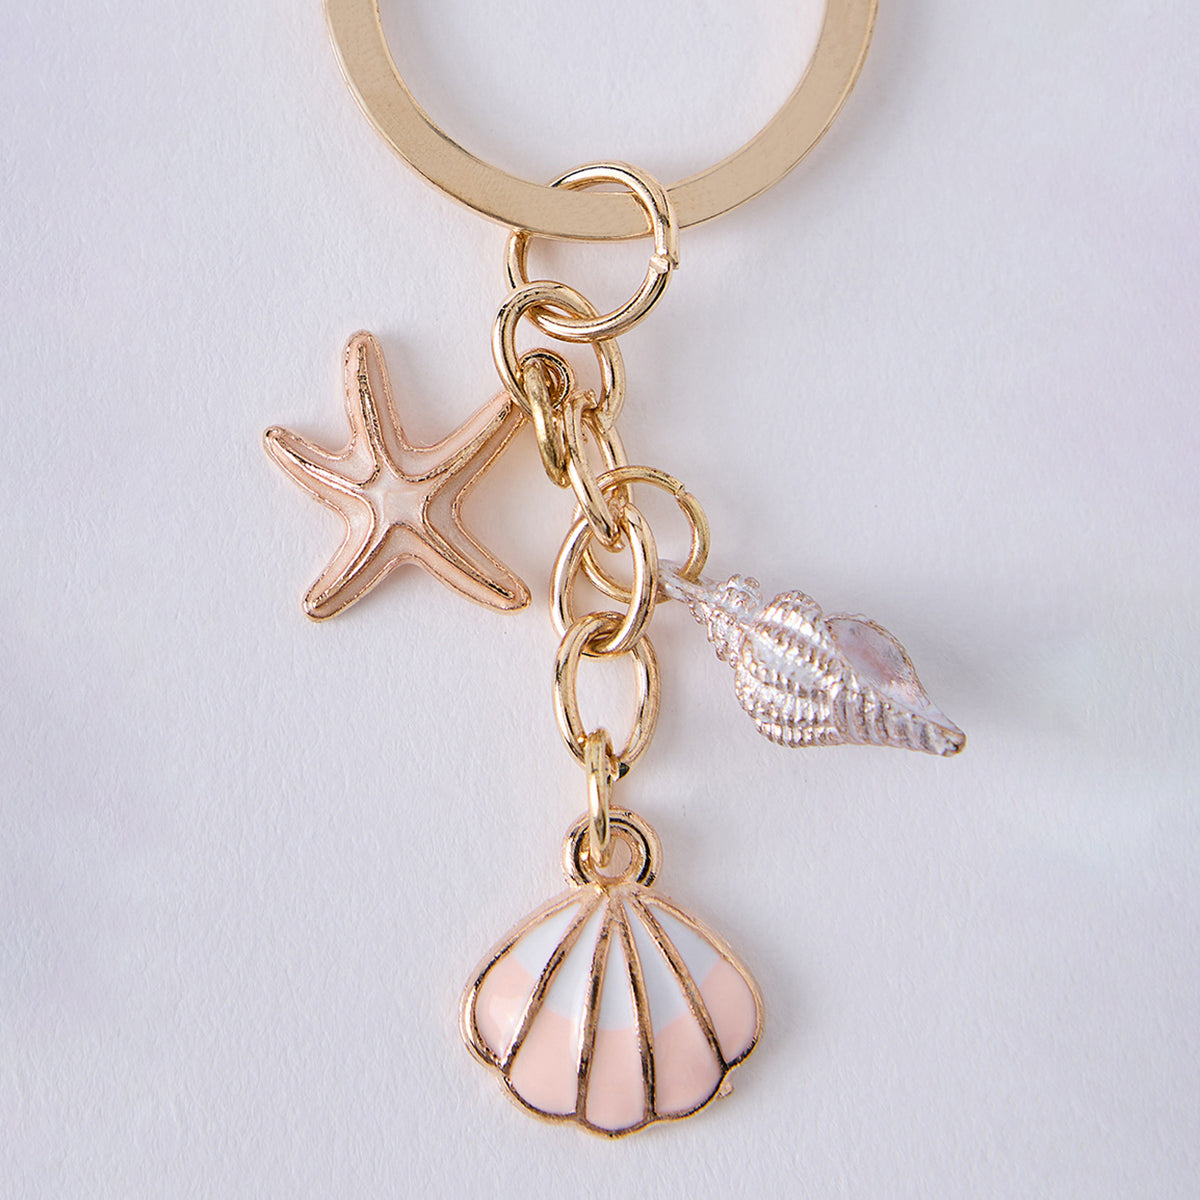 Gold Plated White Sea Shells Keychain